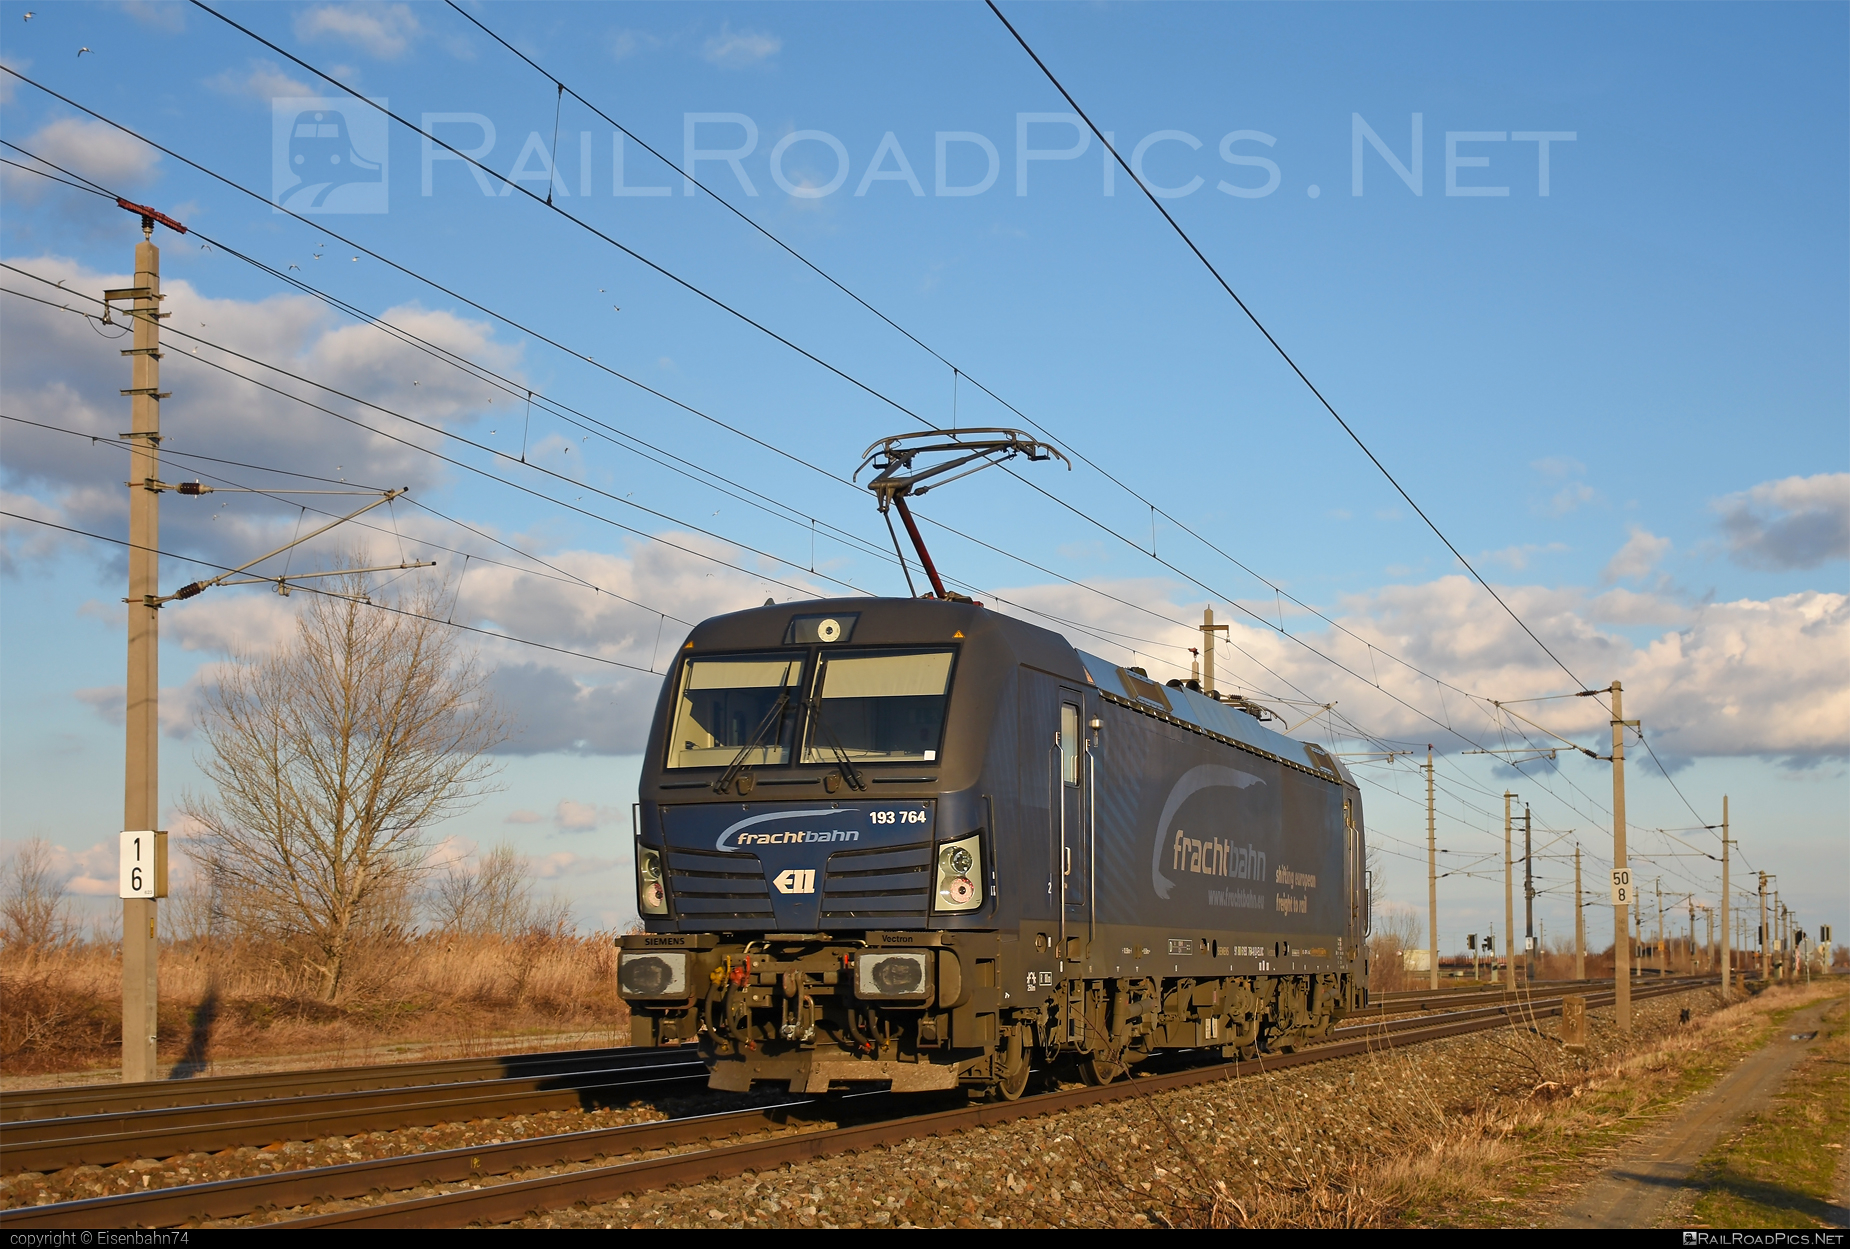 Siemens Vectron MS - 193 764 operated by FRACHTbahn Traktion GmbH #ell #ellgermany #eloc #europeanlocomotiveleasing #frachtbahn #frachtbahntraktion #frachtbahntraktiongmbh #siemens #siemensVectron #siemensVectronMS #vectron #vectronMS